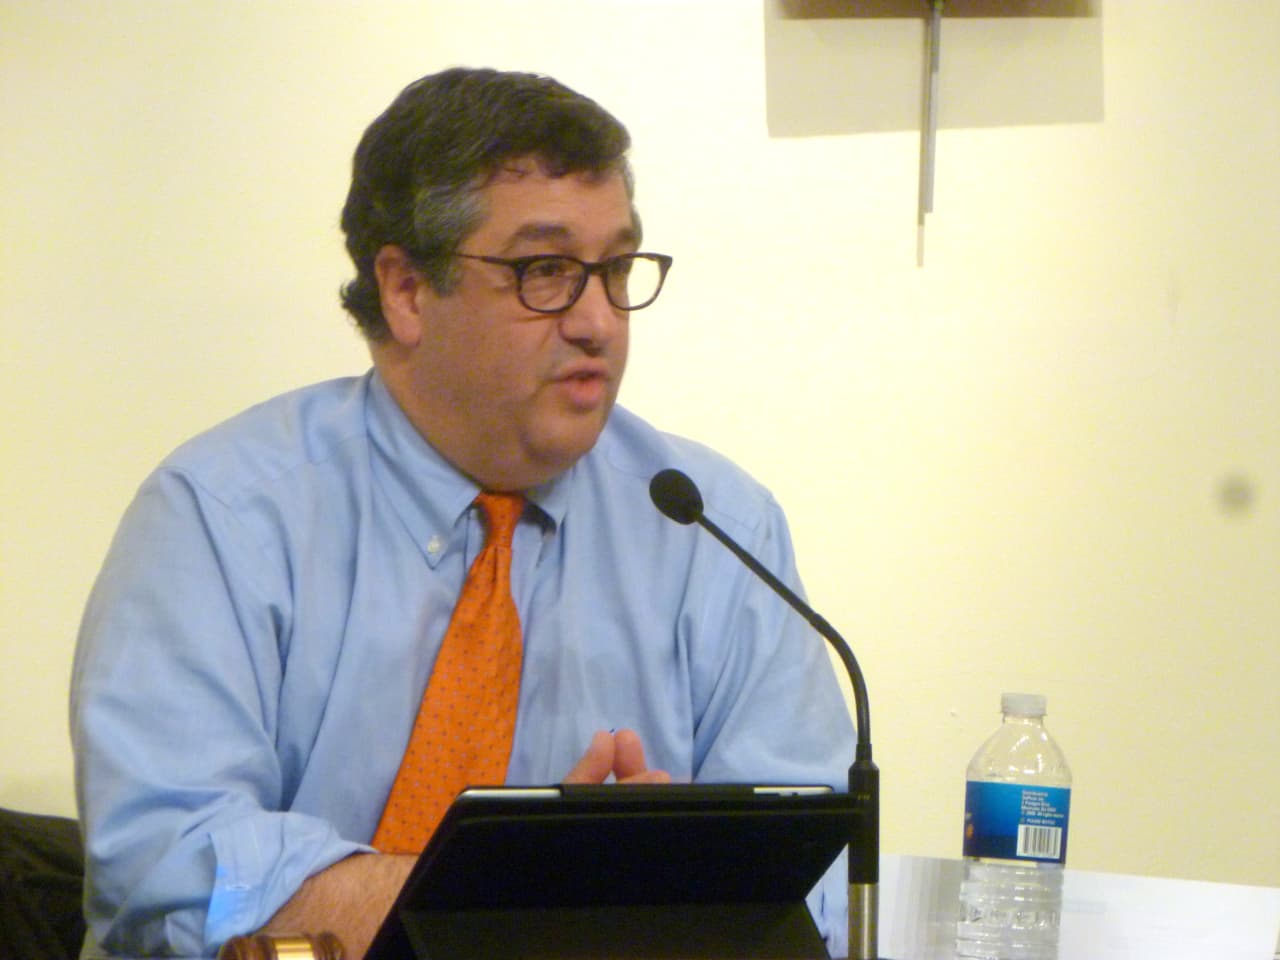 New Canaan First Selectman Rob Mallozzi and other town officials were able to approve a budget for 2014-15.